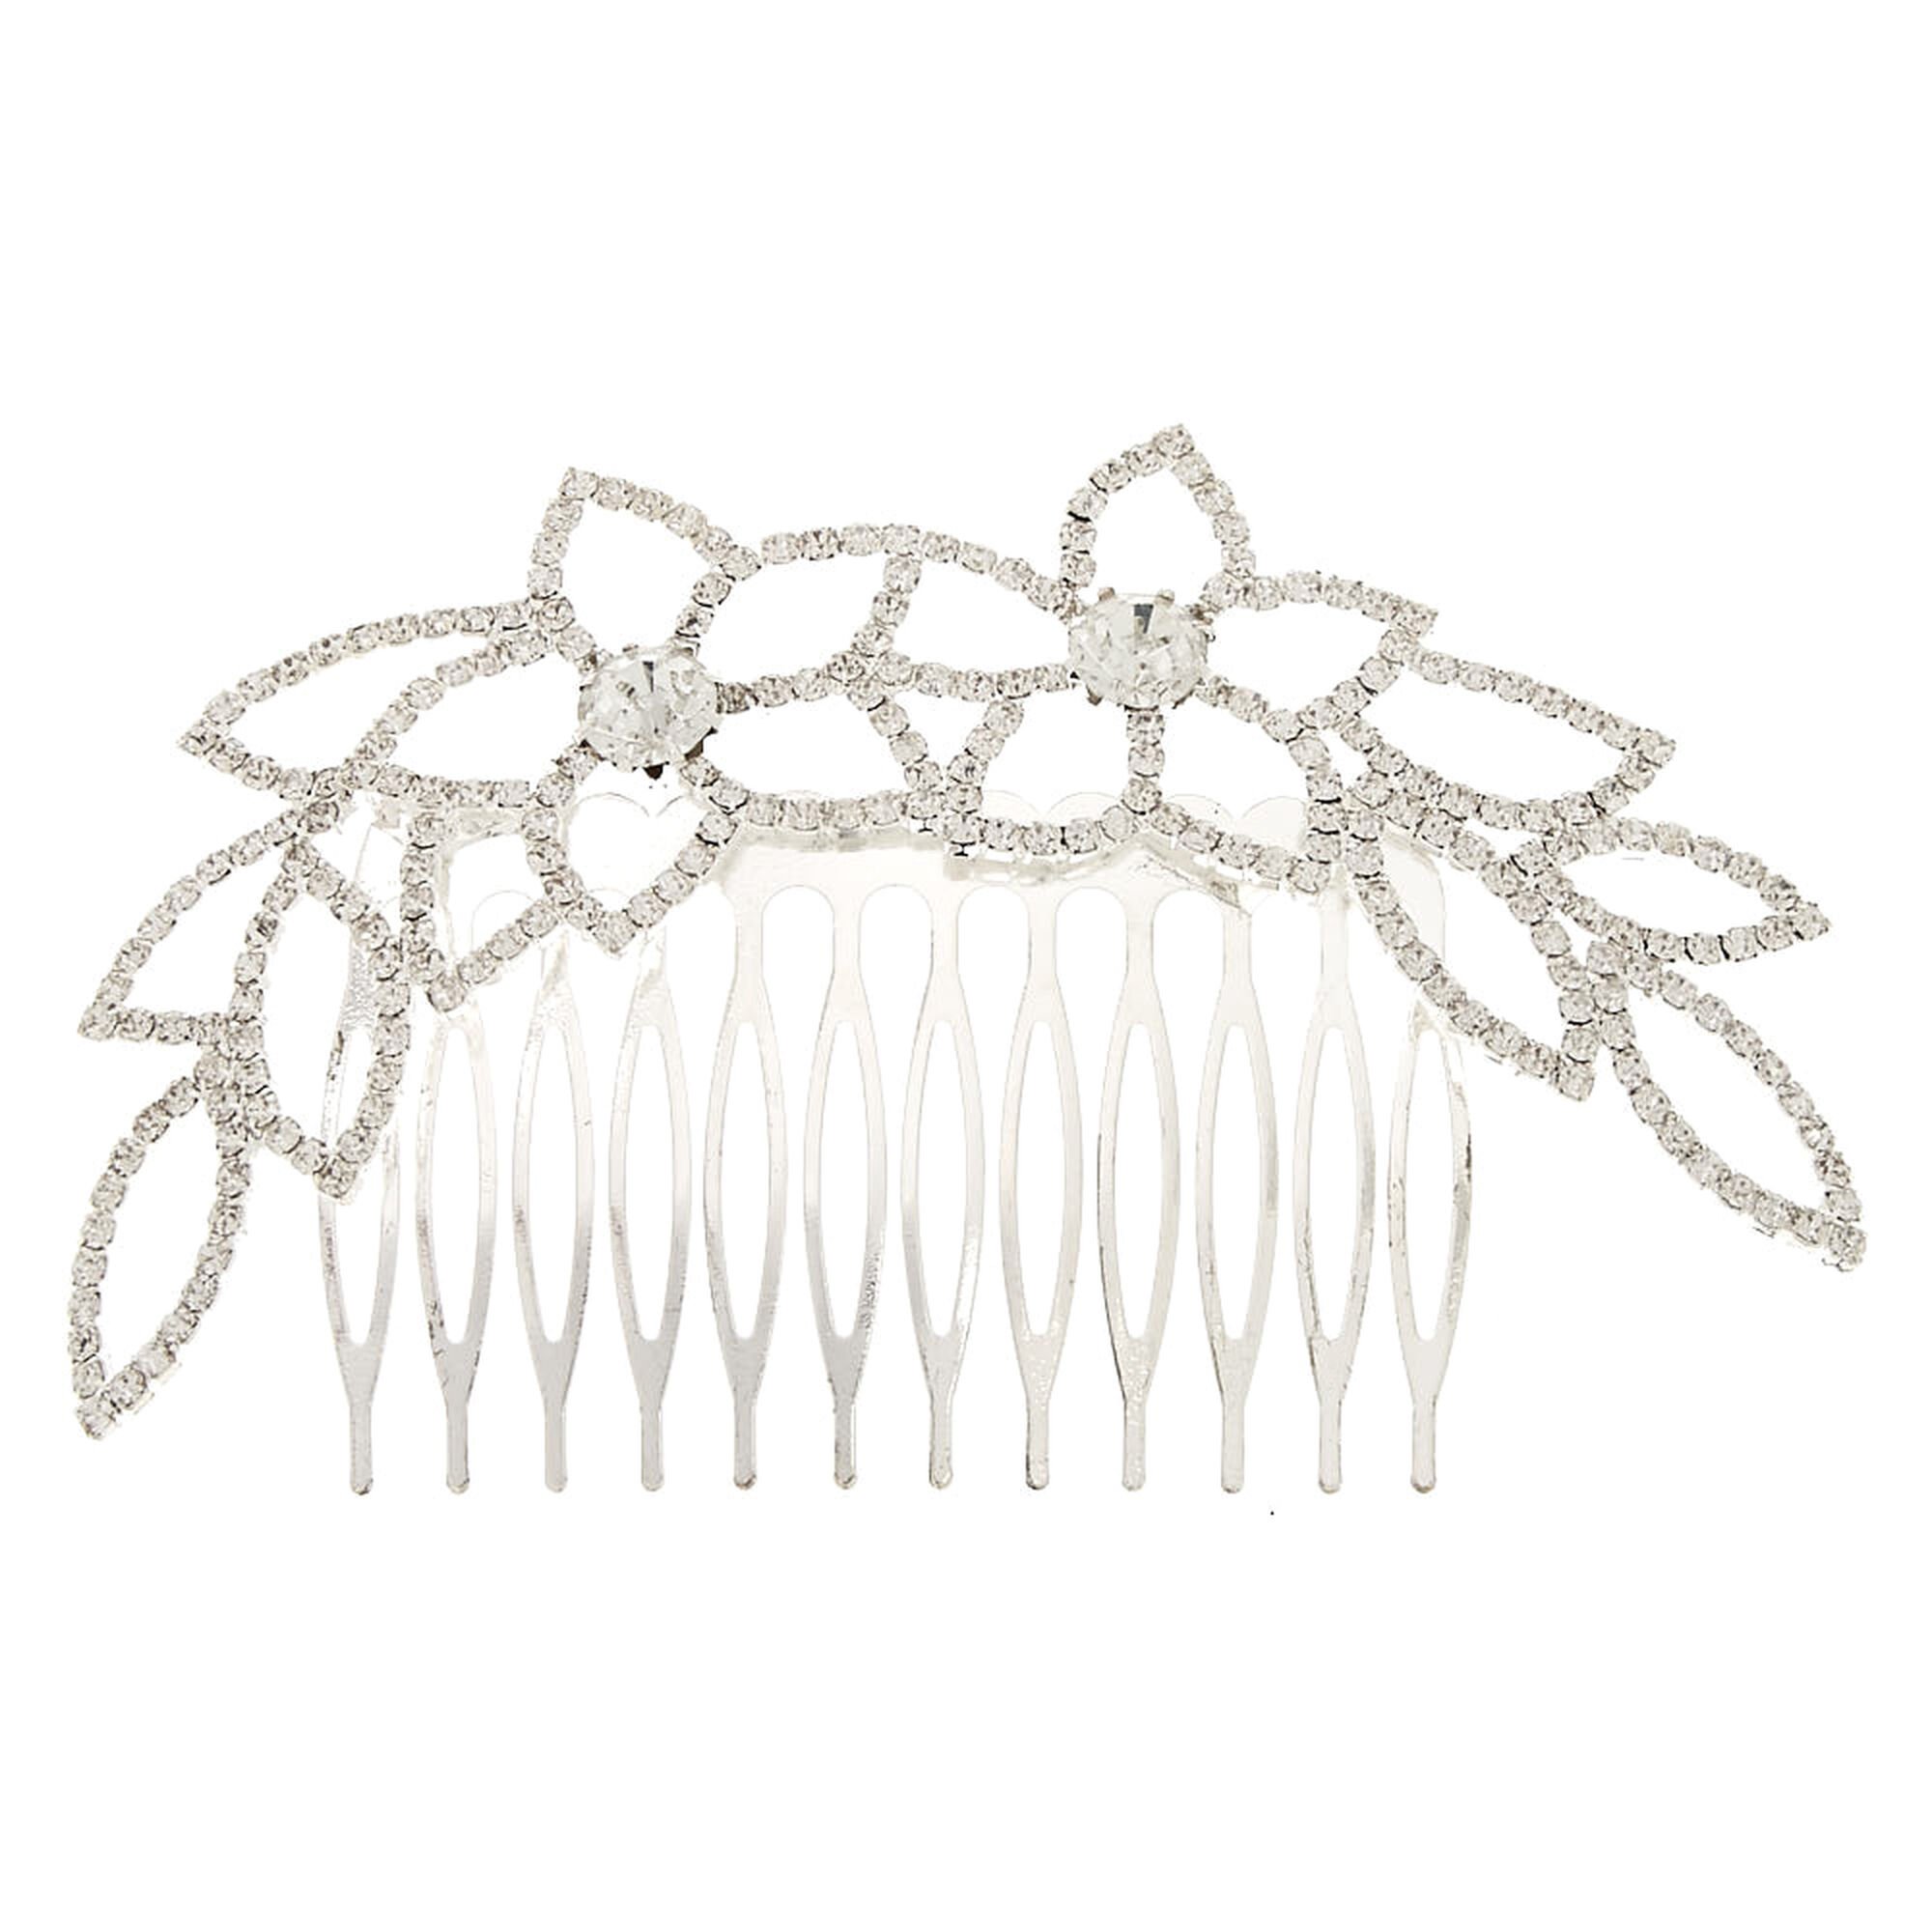 View Claires Crystal Flower And Leaf Hair Comb information